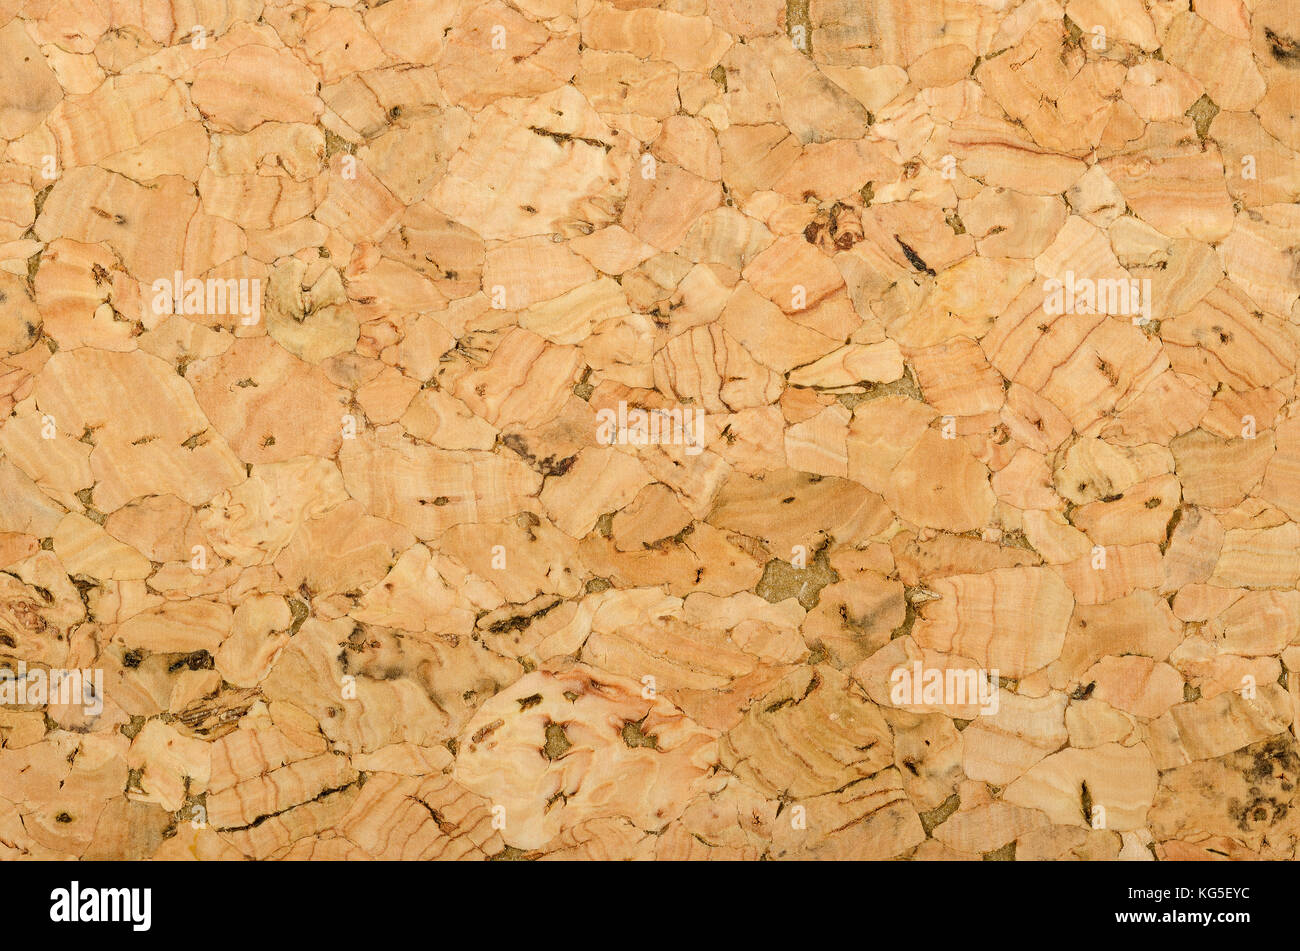 Cork sheet surface with coarse texture, comprised of rough grained cork oak, Quercus suber. Decorative panels and veneers, used as bulletin boards. Stock Photo